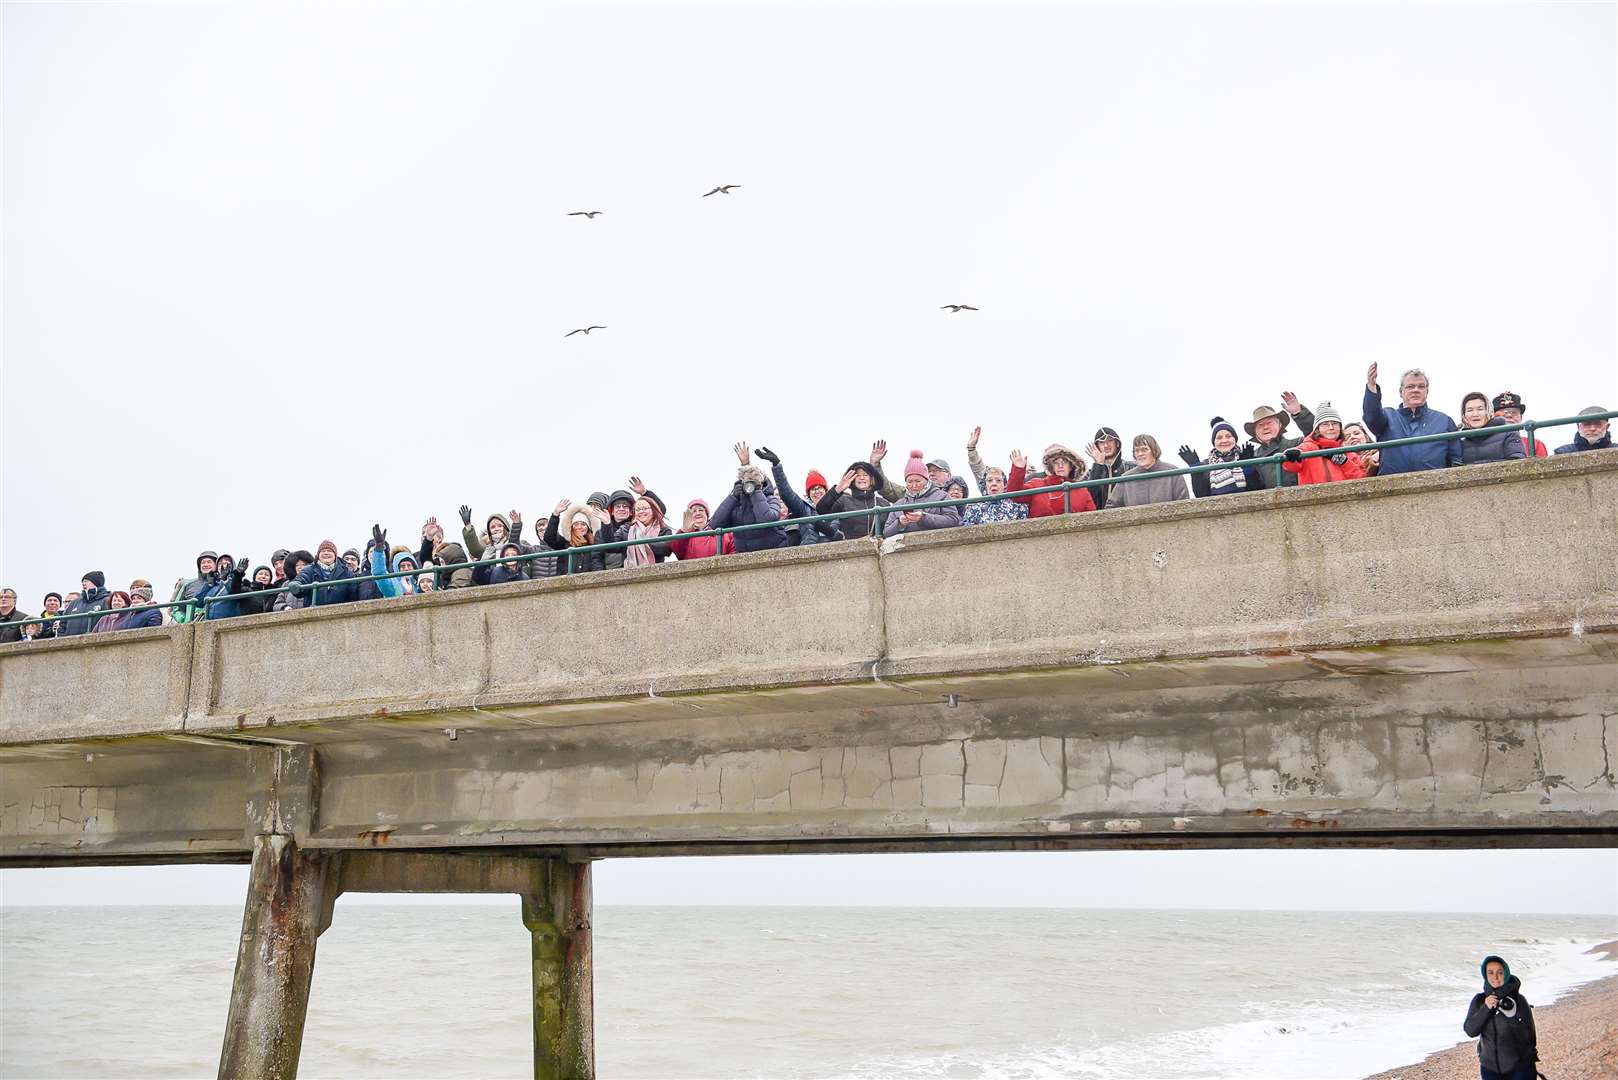 Spectators are asked to watch from the Pier Picture: Alan Langley